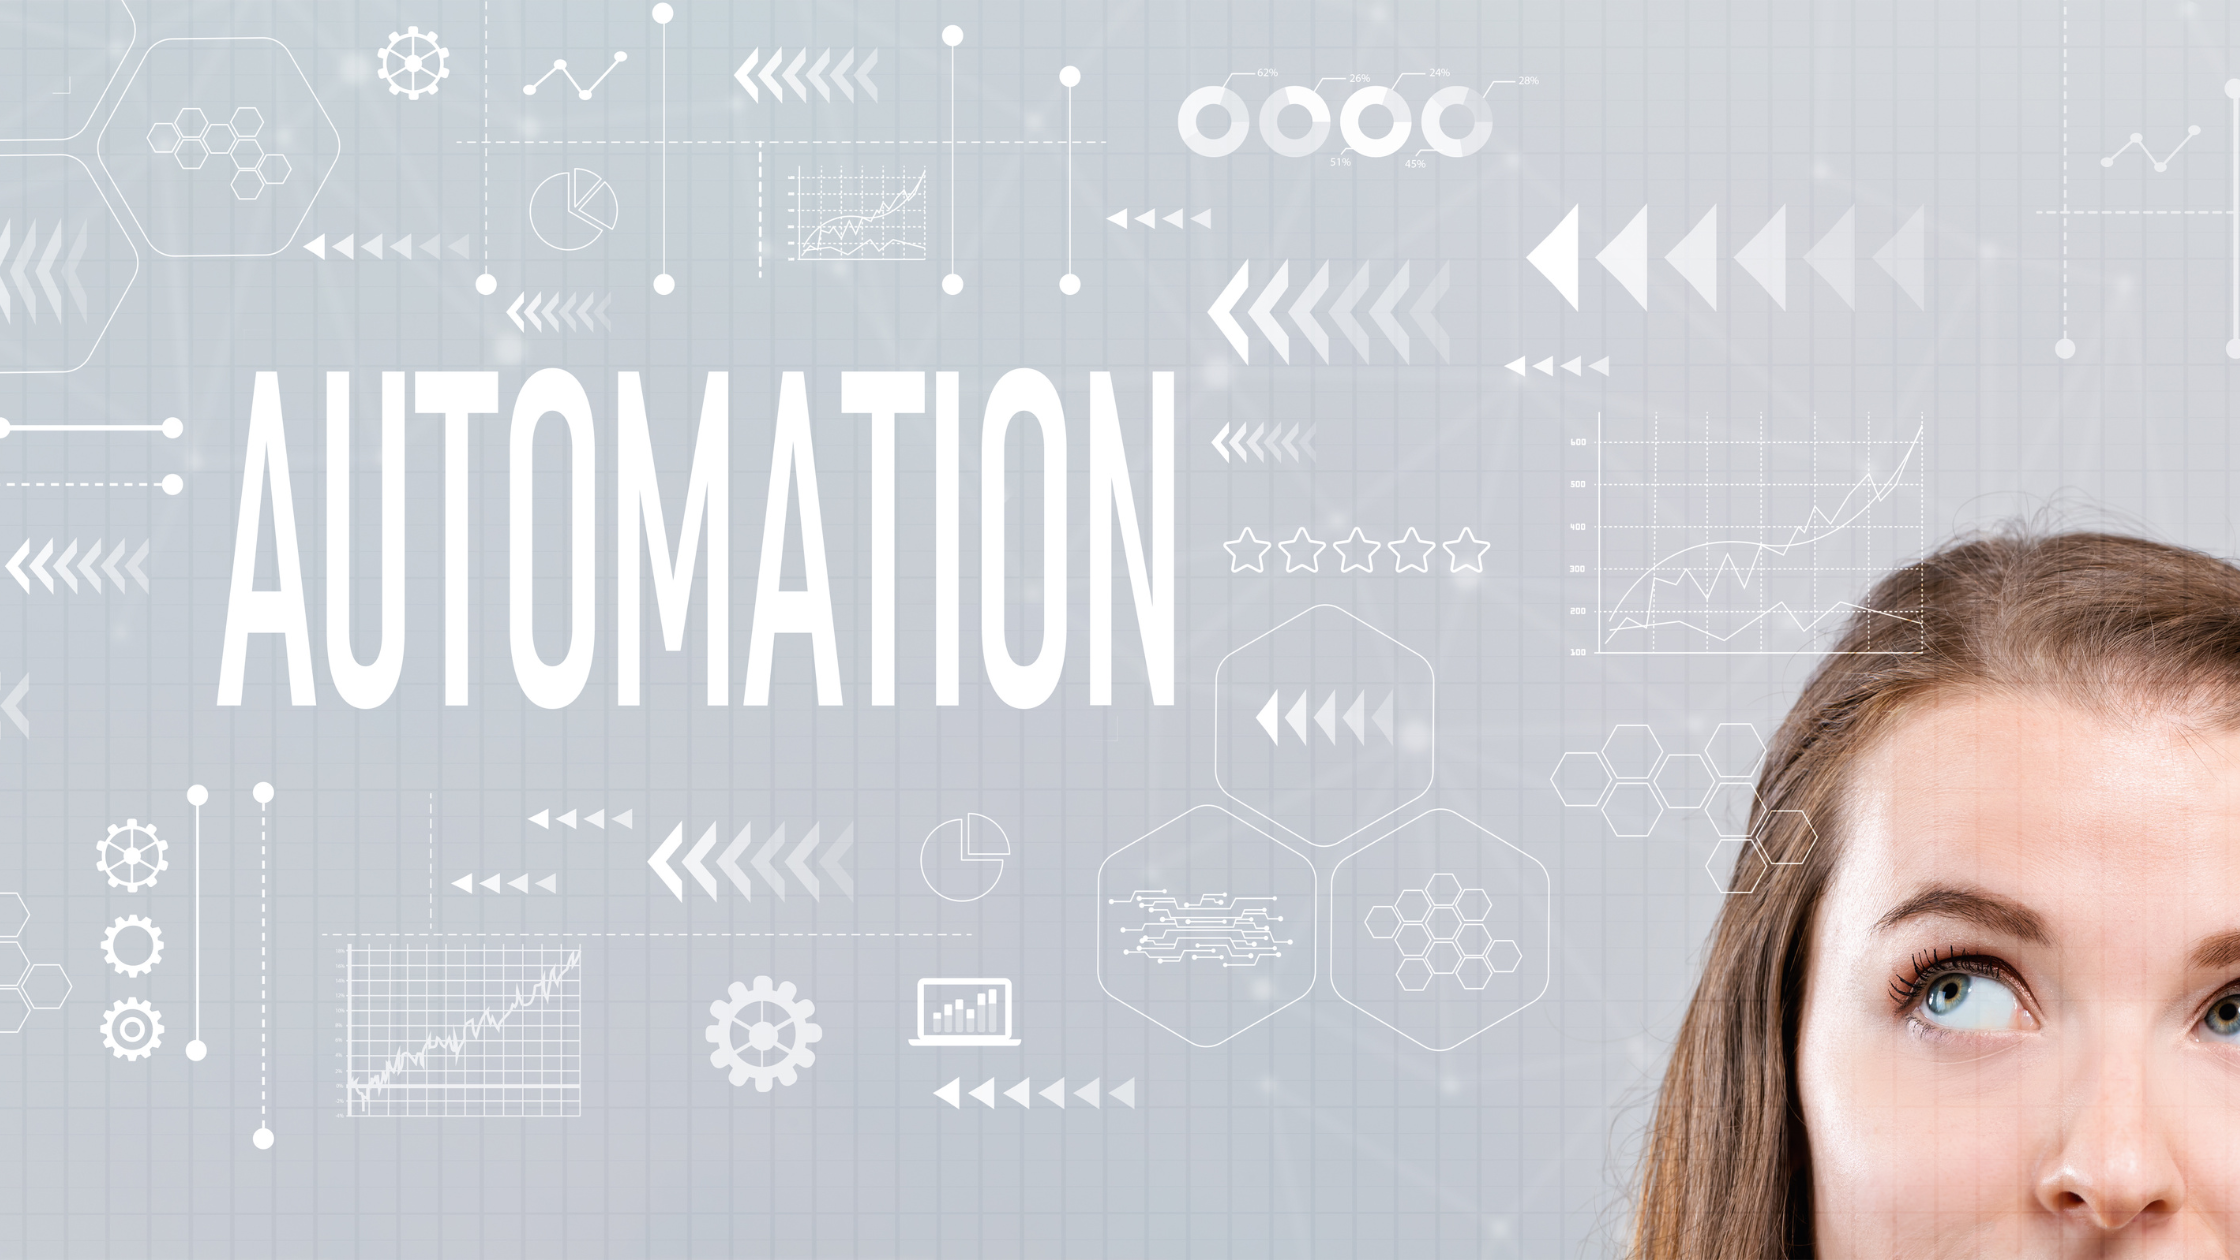 The basics of workplace automation